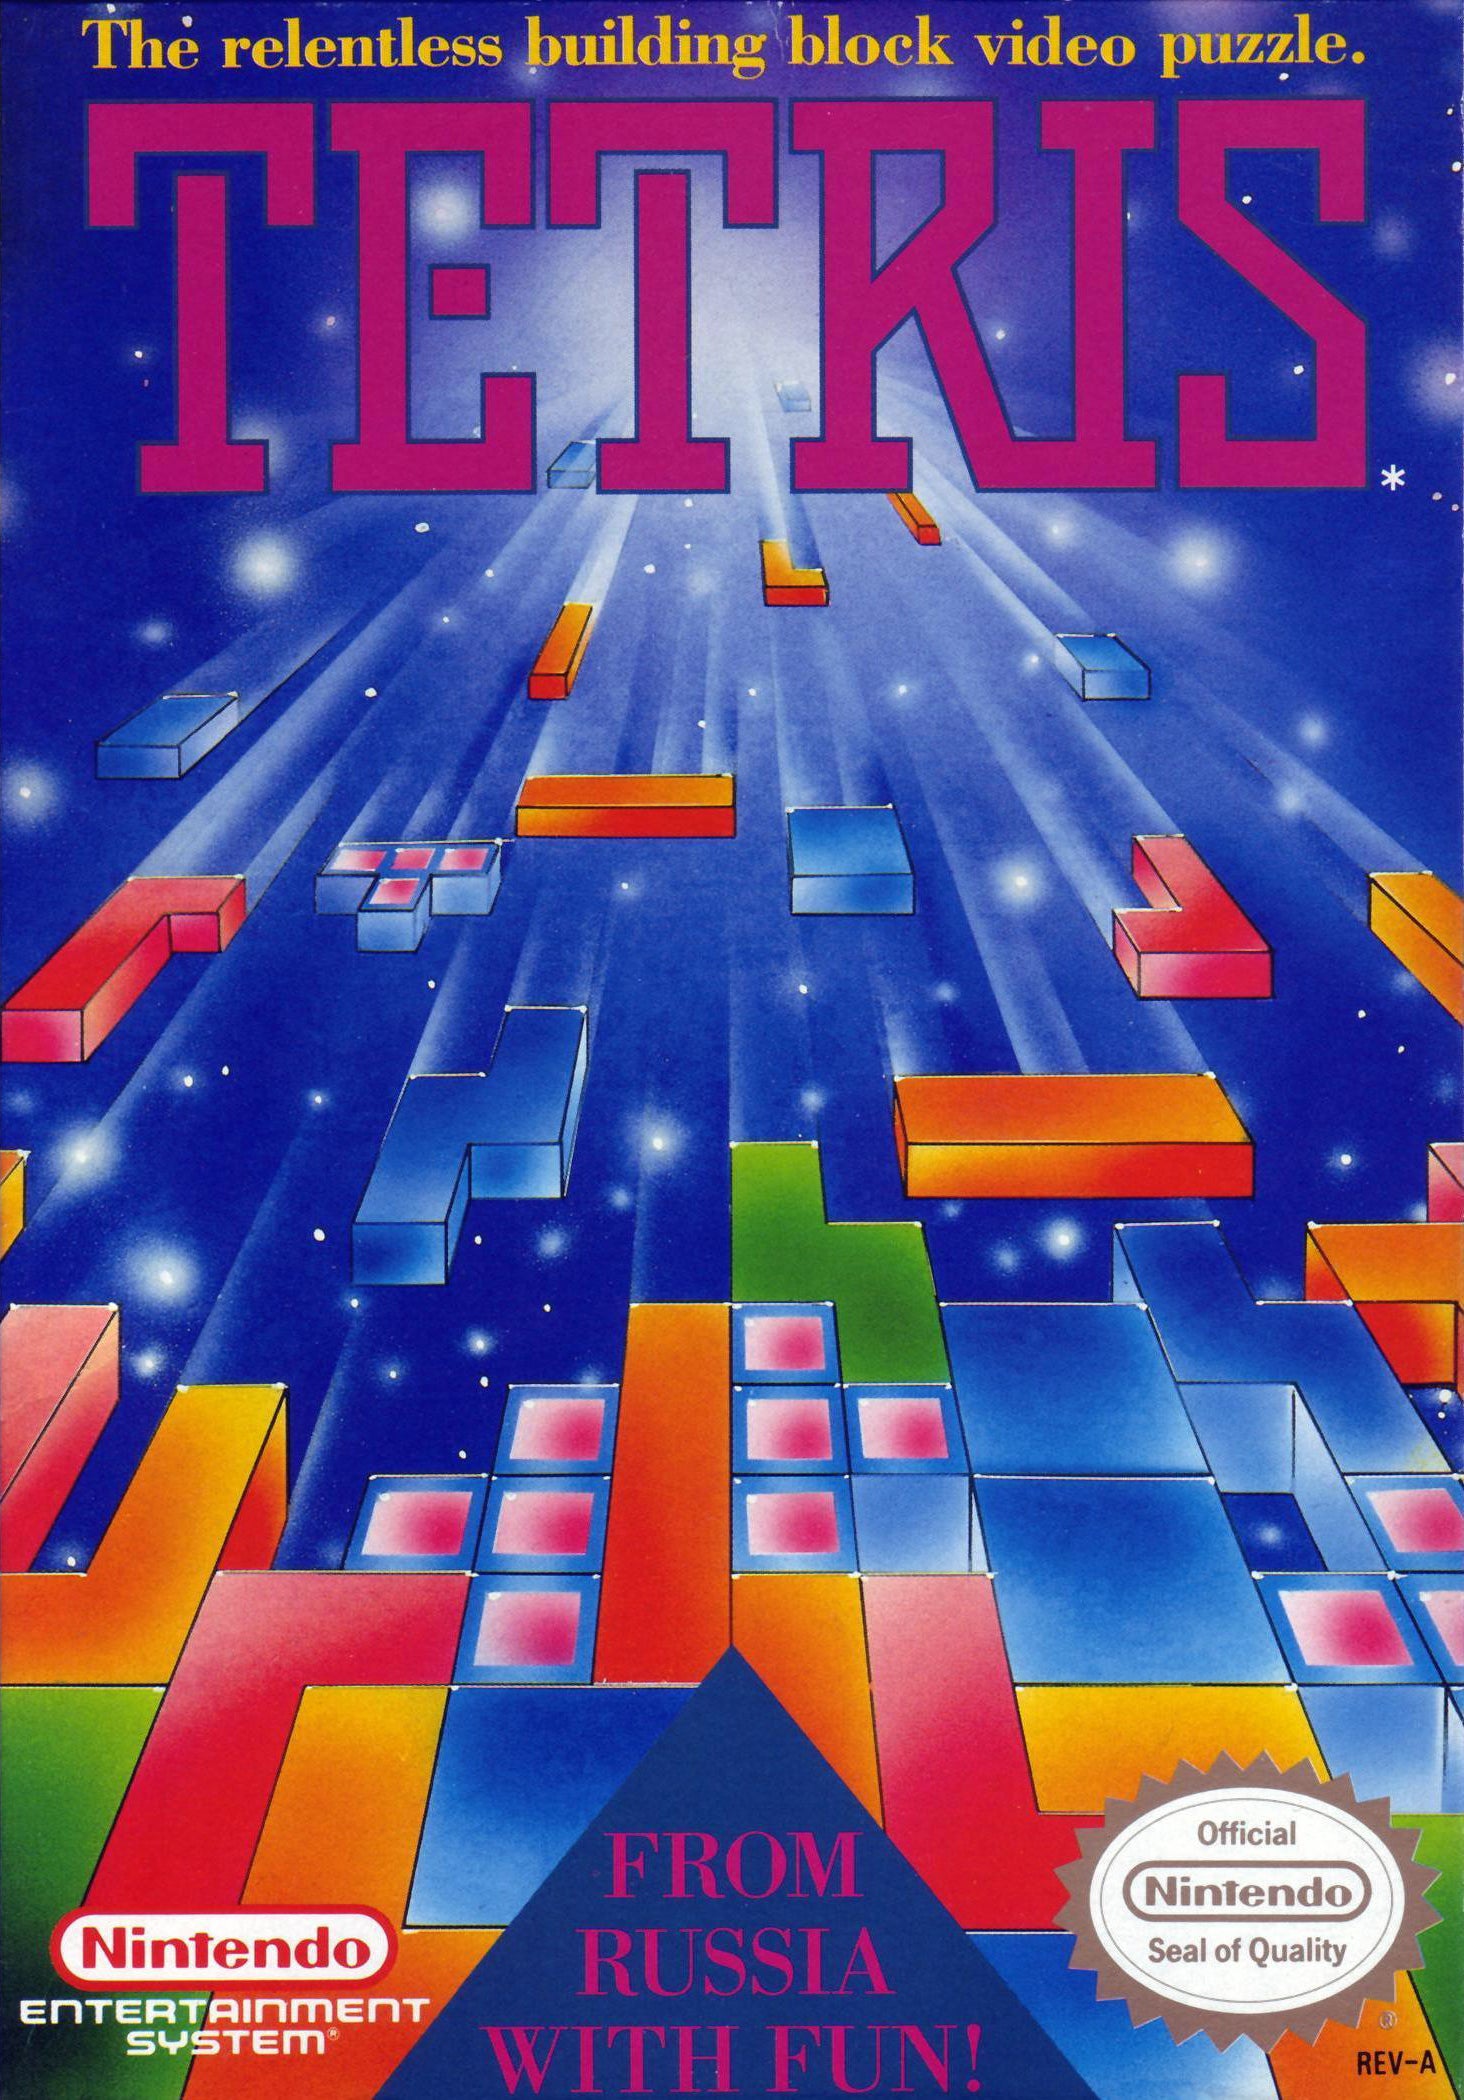 Tetris - Authentic NES Game Cartridge - YourGamingShop.com - Buy, Sell, Trade Video Games Online. 120 Day Warranty. Satisfaction Guaranteed.